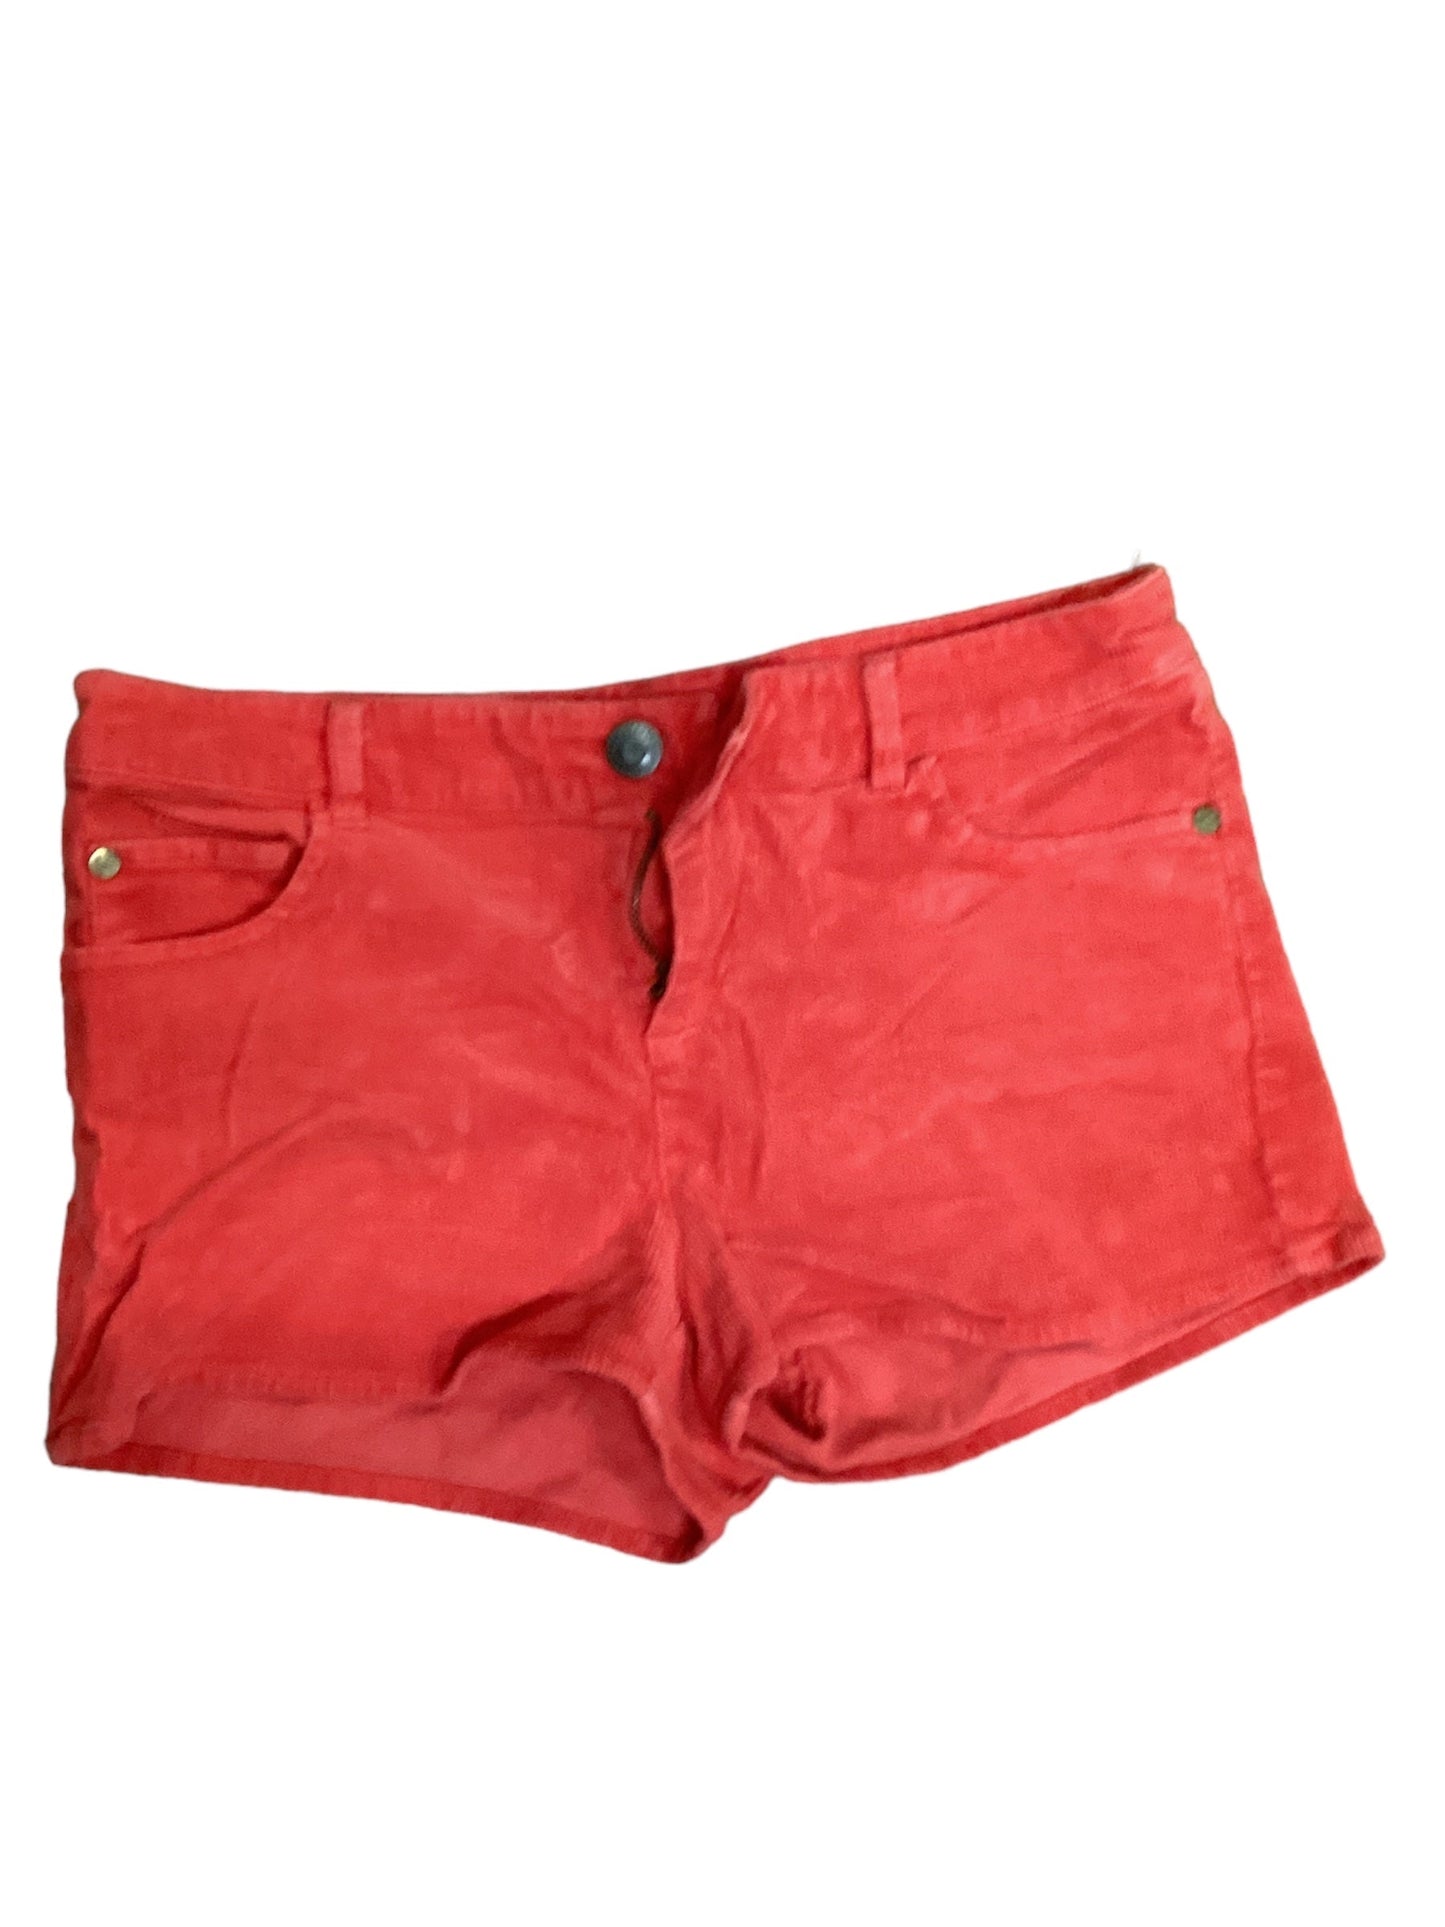 Shorts By Quicksilver  Size: 2